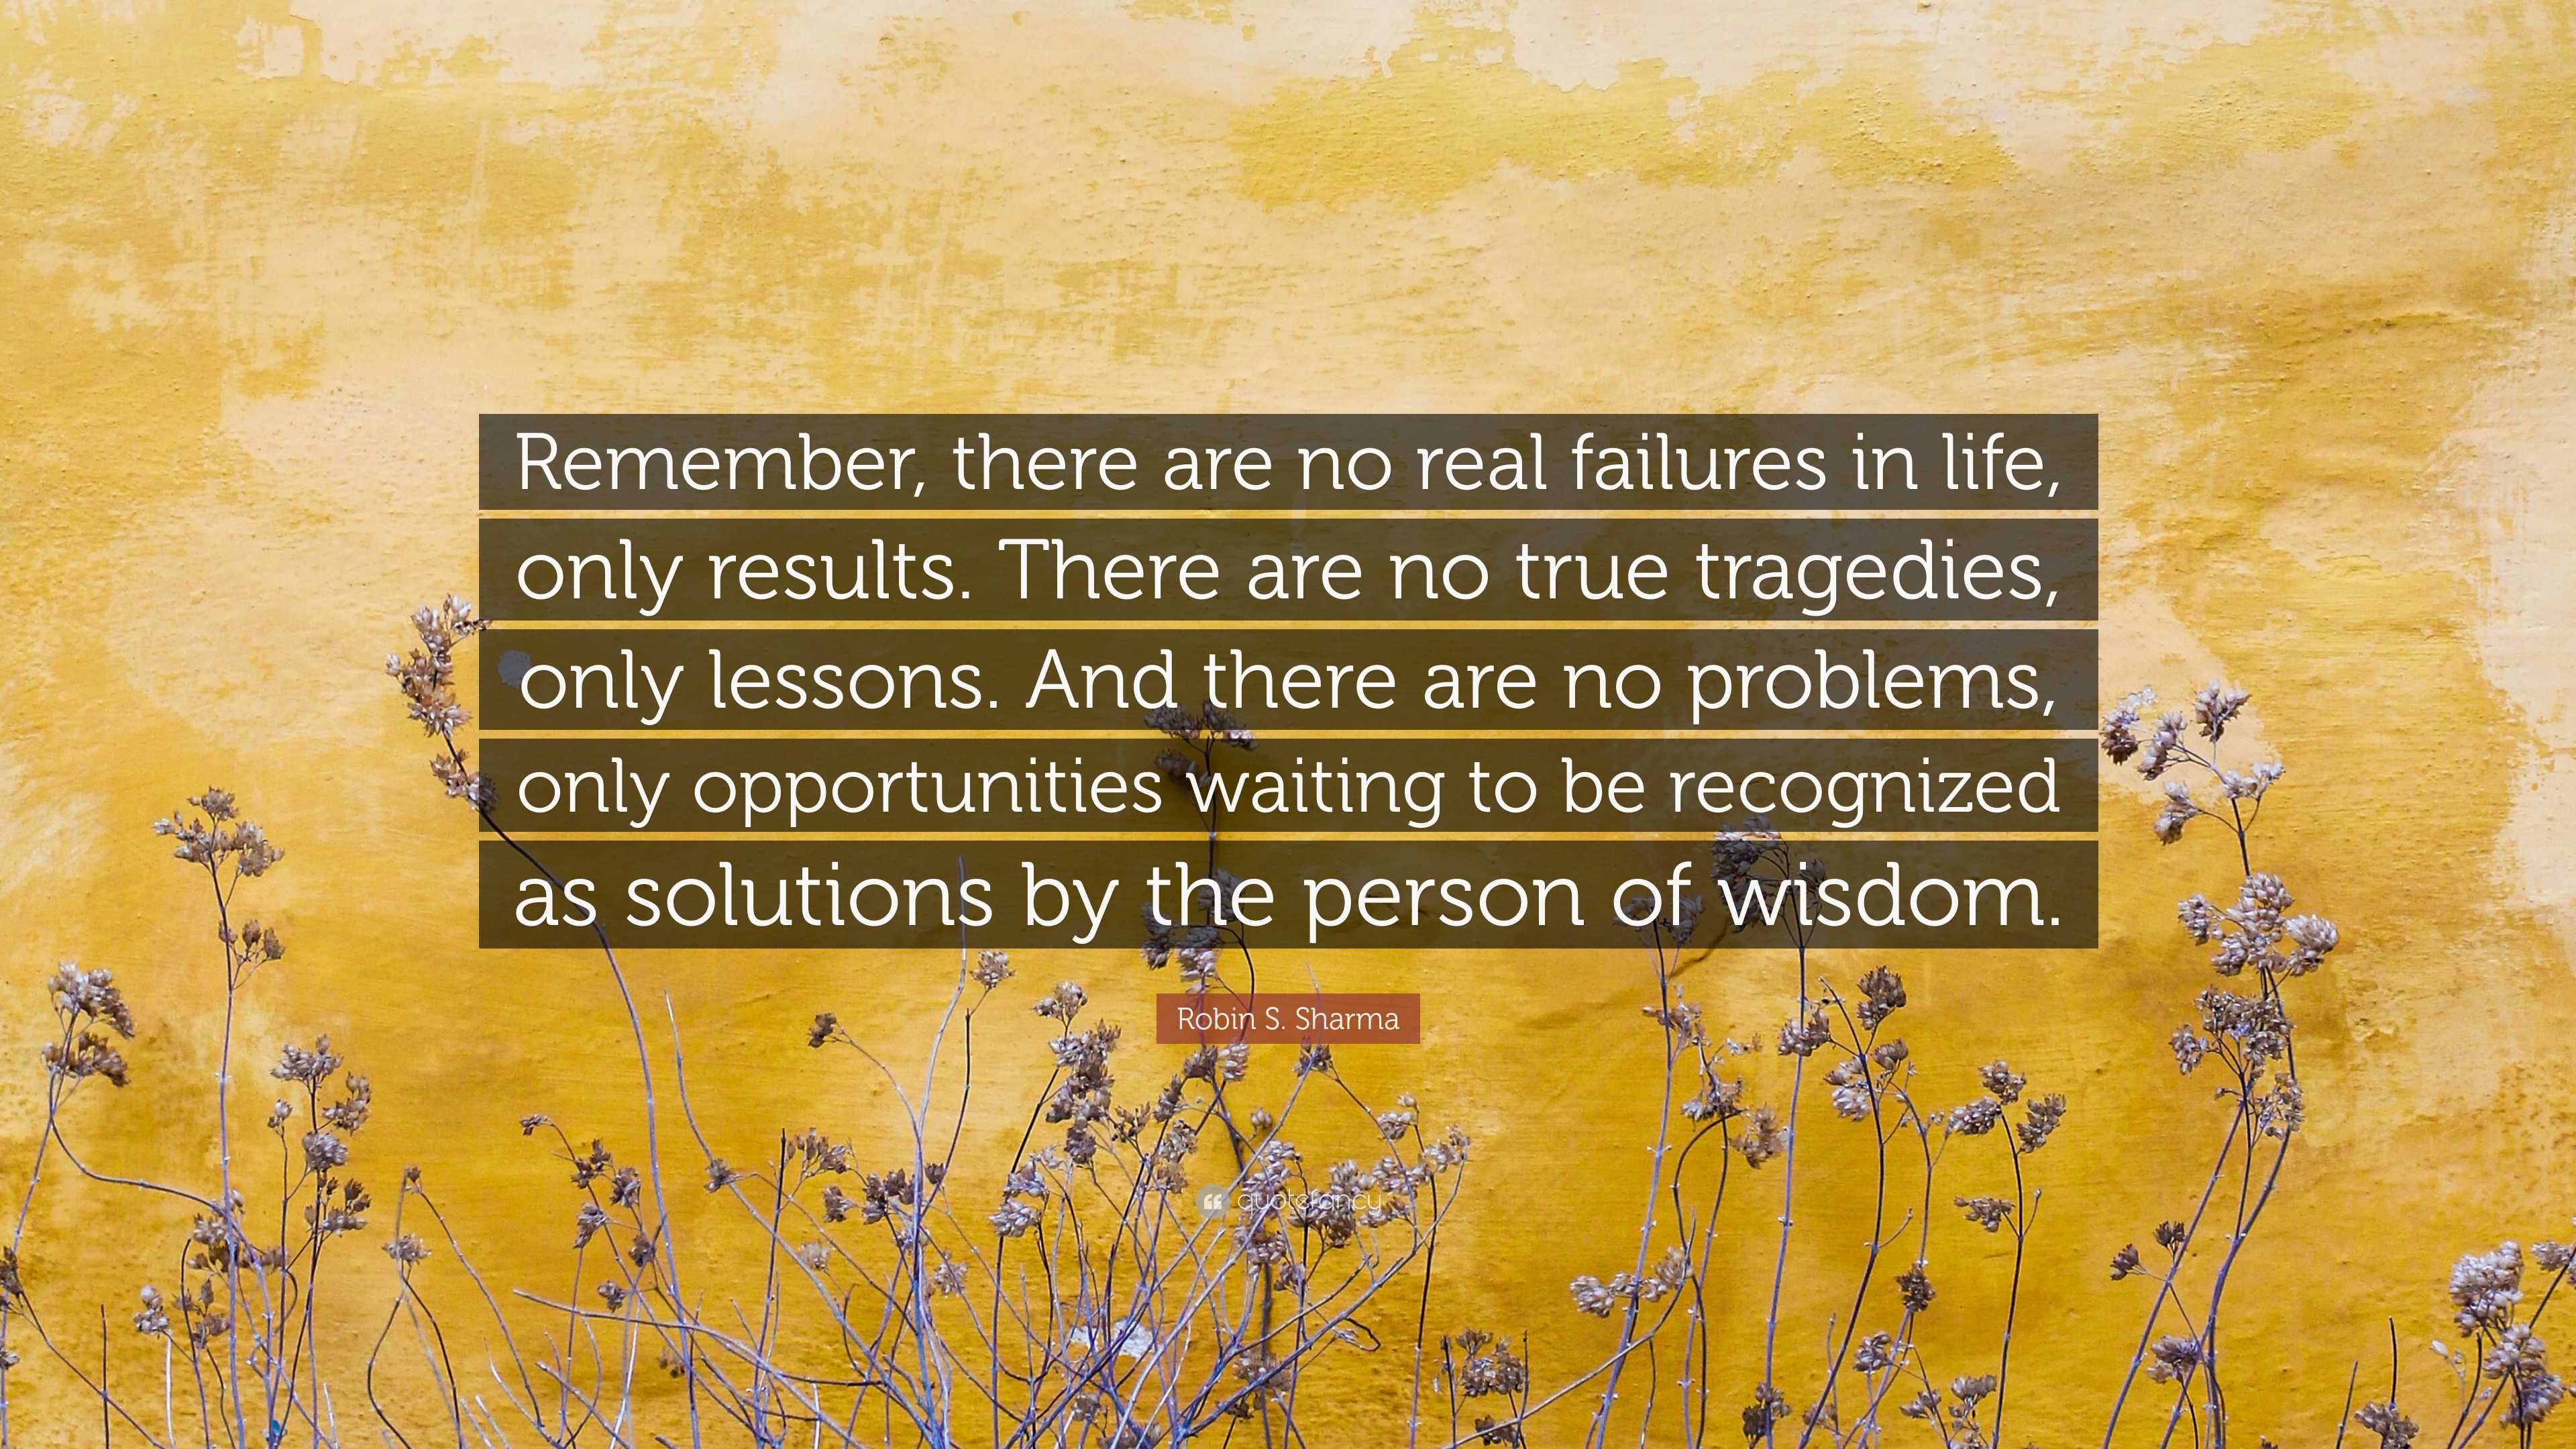 51 Quotes About Learning Lessons of Life You Have to Remember